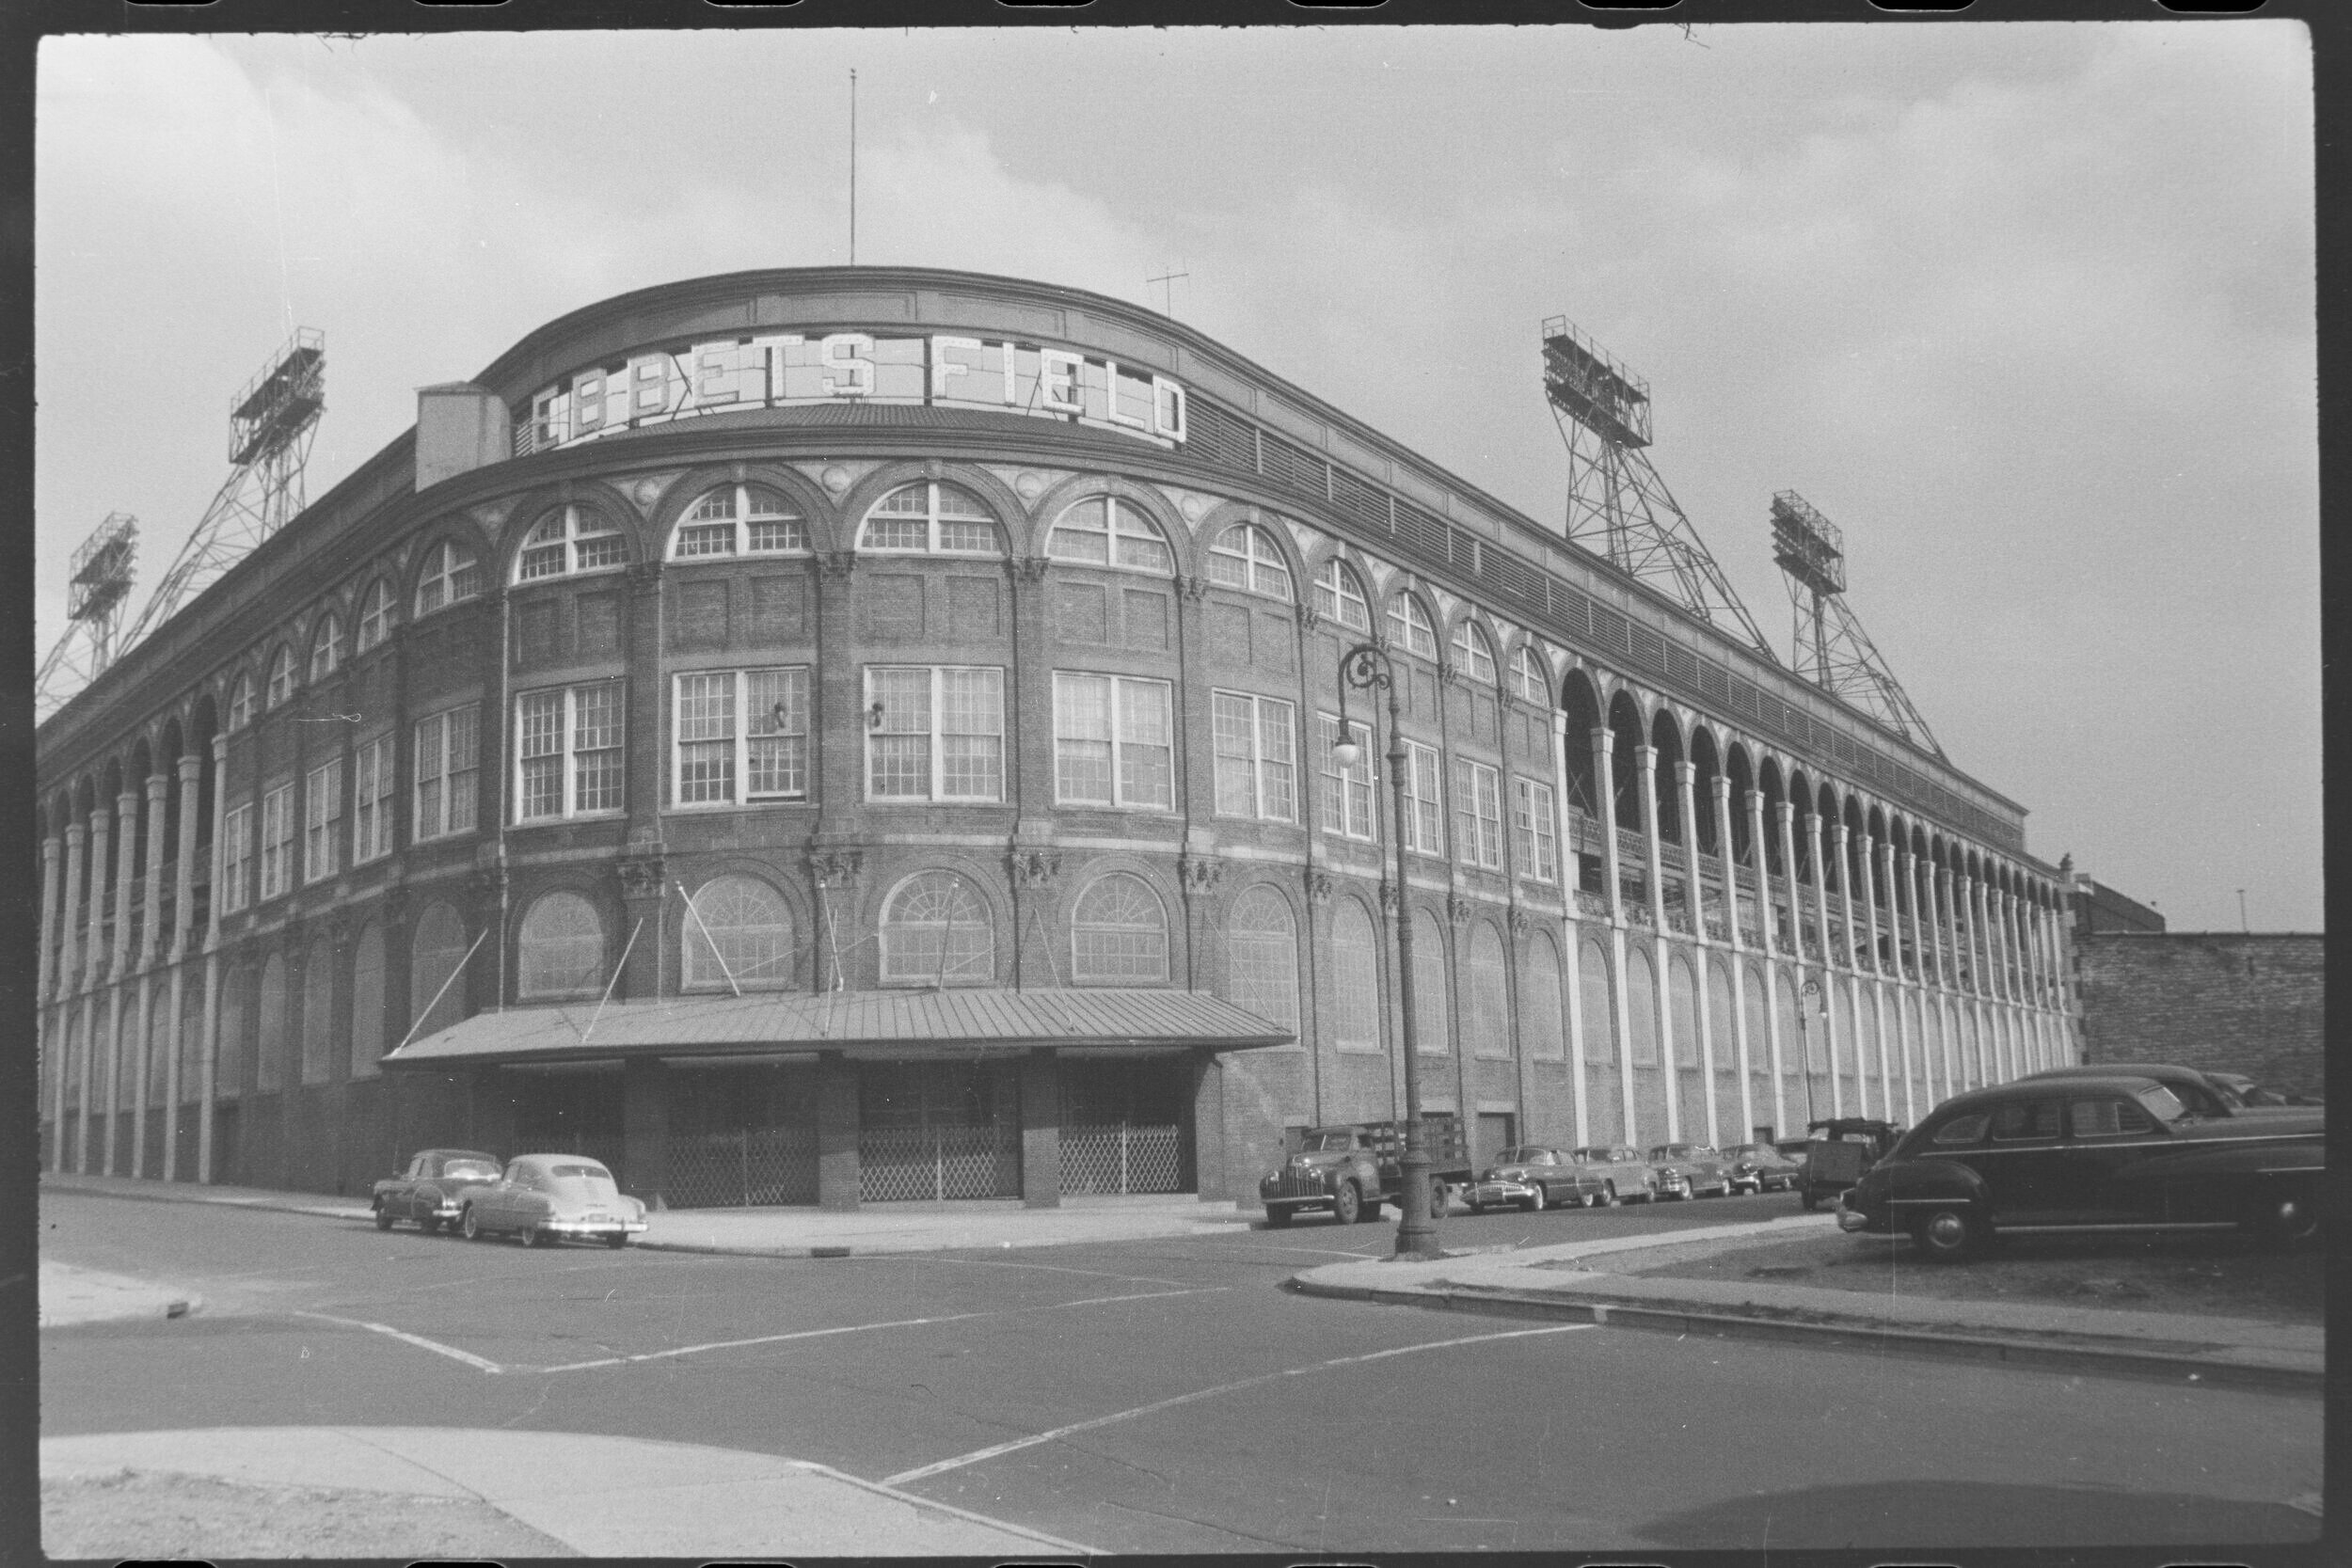 1941 National Champion Brooklyn Dodgers at Ebbets Field, 1941